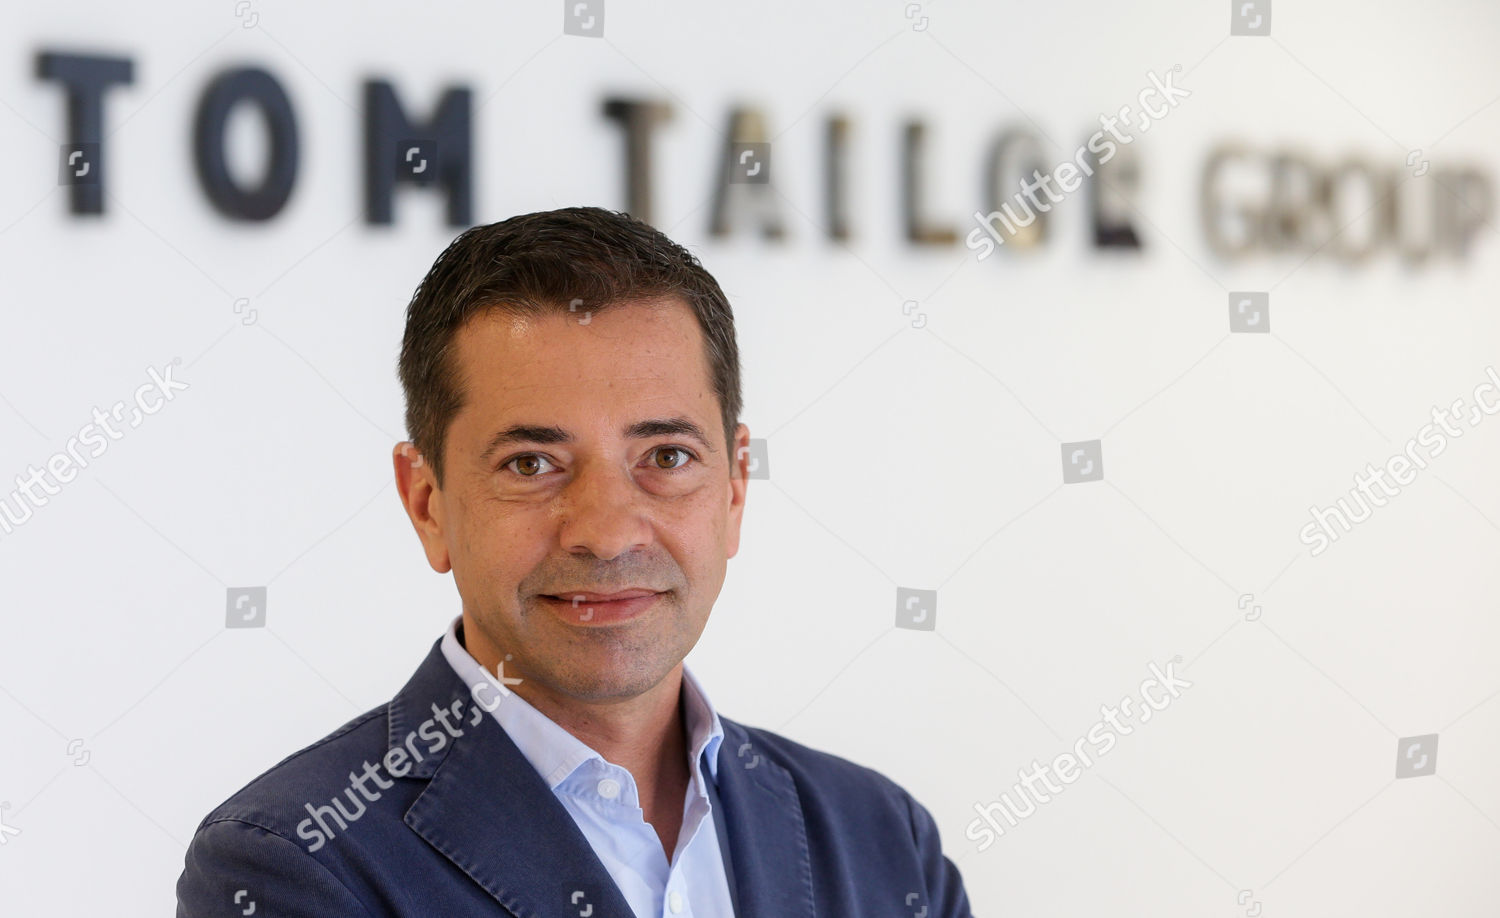 Tom Tailor Group Ceo Dieter Holzer Poses Editorial Stock Photo Stock Image Shutterstock